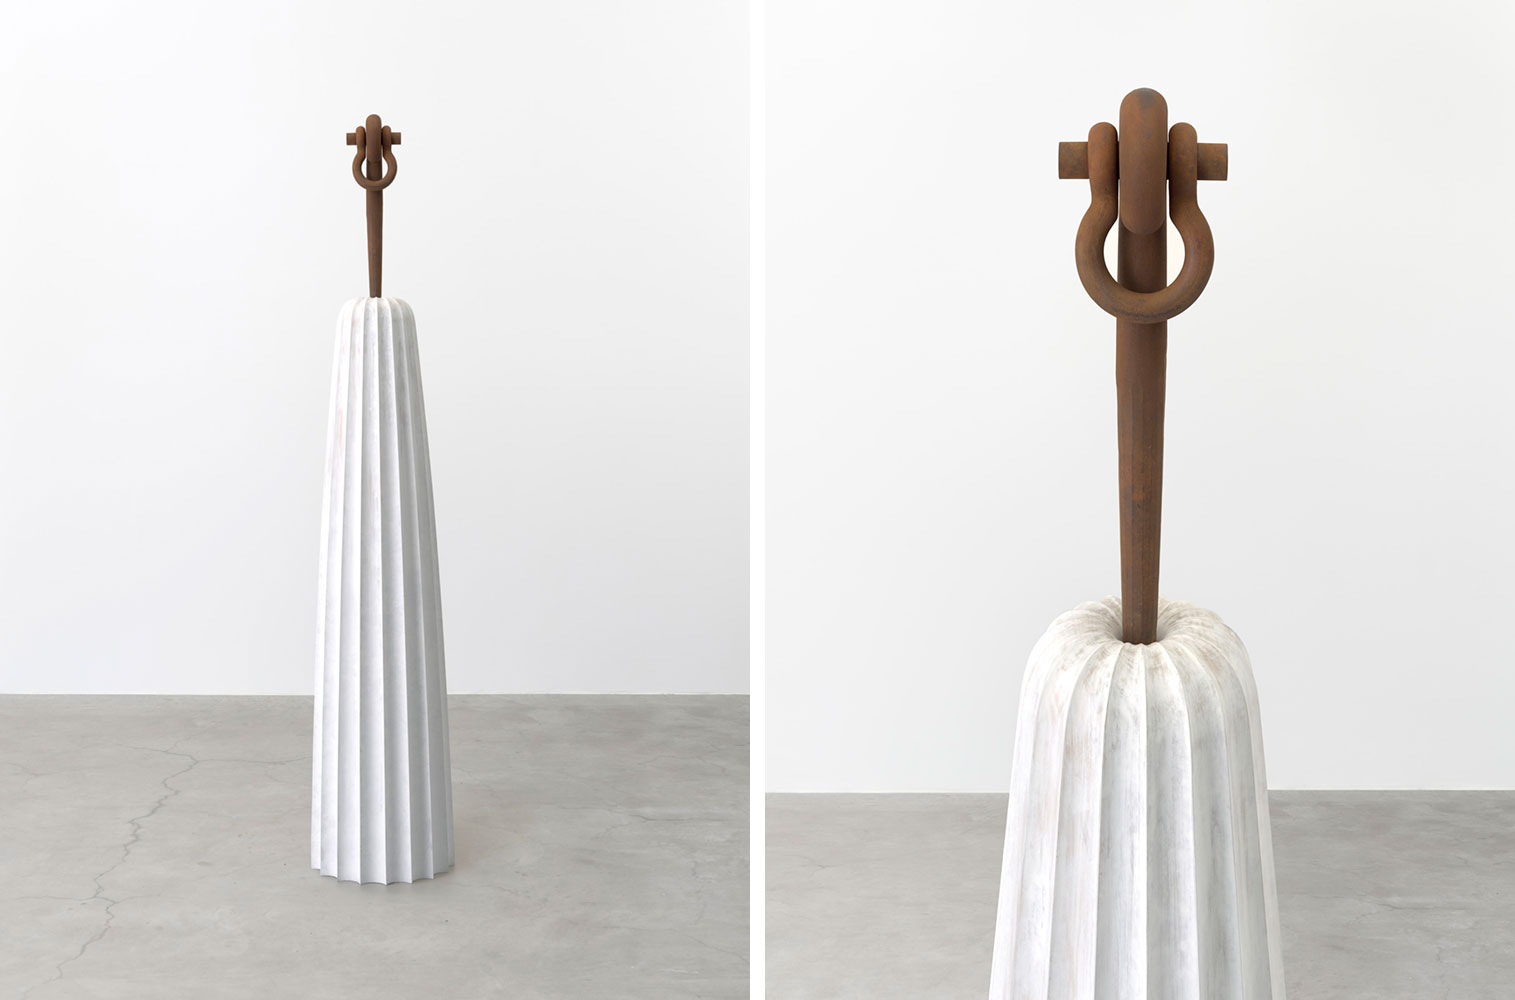 Left & Right: Martin Puryear, Column for Sally Hemings 2019, Cast iron, painted tulip poplar, 80 × 15¾ × 15¾ inches; 203 × 40 × 40 cm, © Martin Puryear, Courtesy the artist and Matthew Marks Gallery